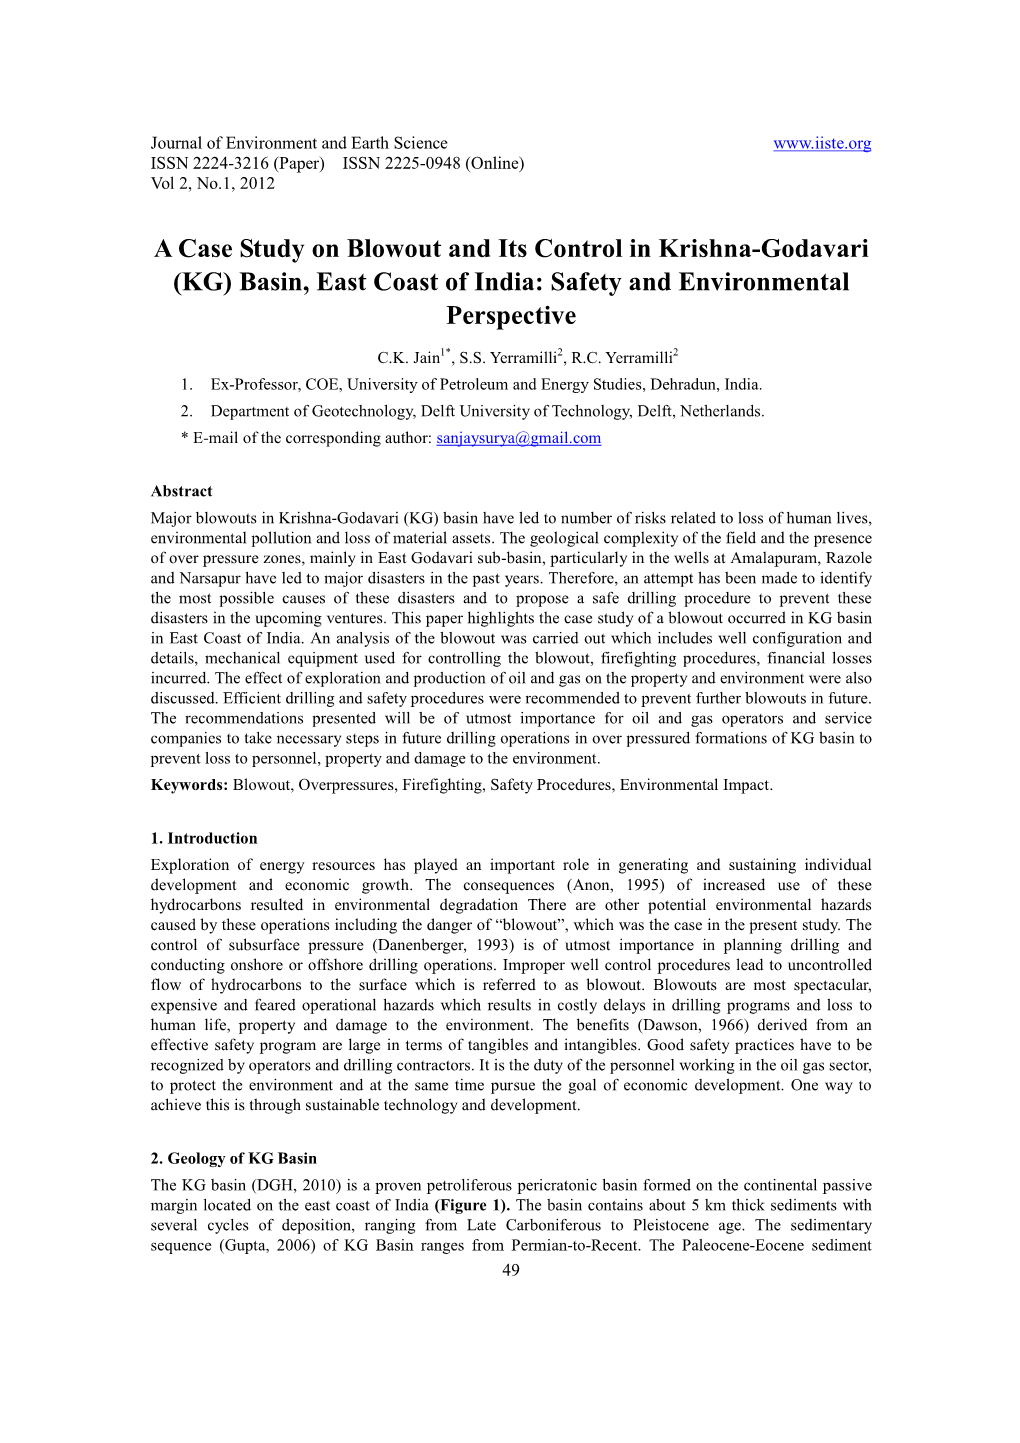 A Case Study on Blowout and Its Control in Krishna-Godavari (KG) Basin, East Coast of India: Safety and Environmental Perspective